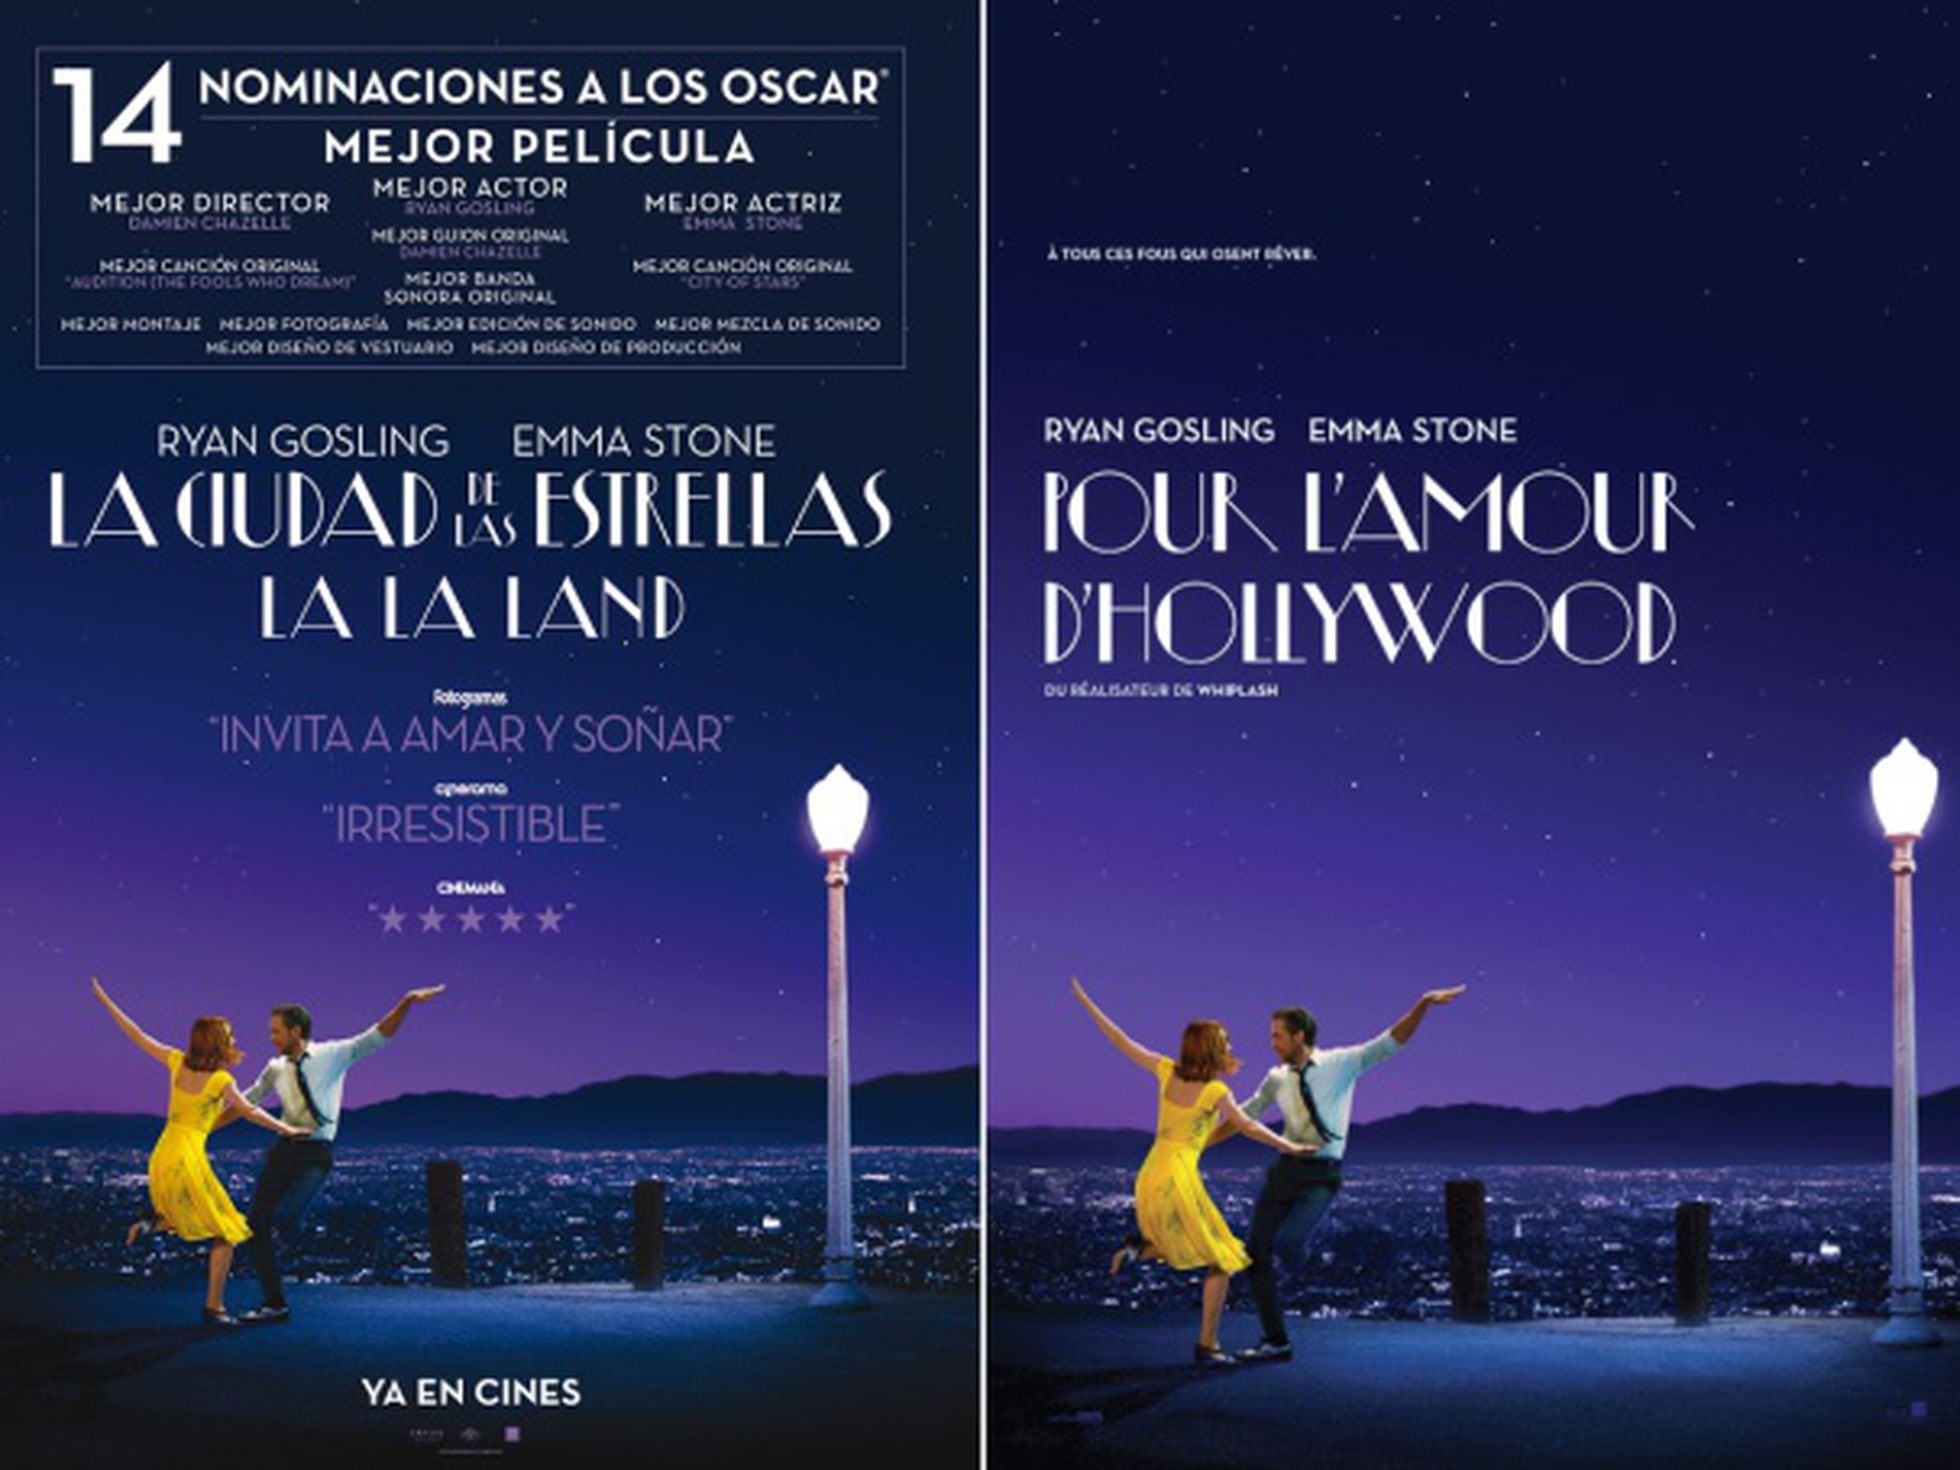 Hollywood movies in Spain: Why do movie titles in Spain end up with such  strange translations? | Verne | EL PAÍS English Edition